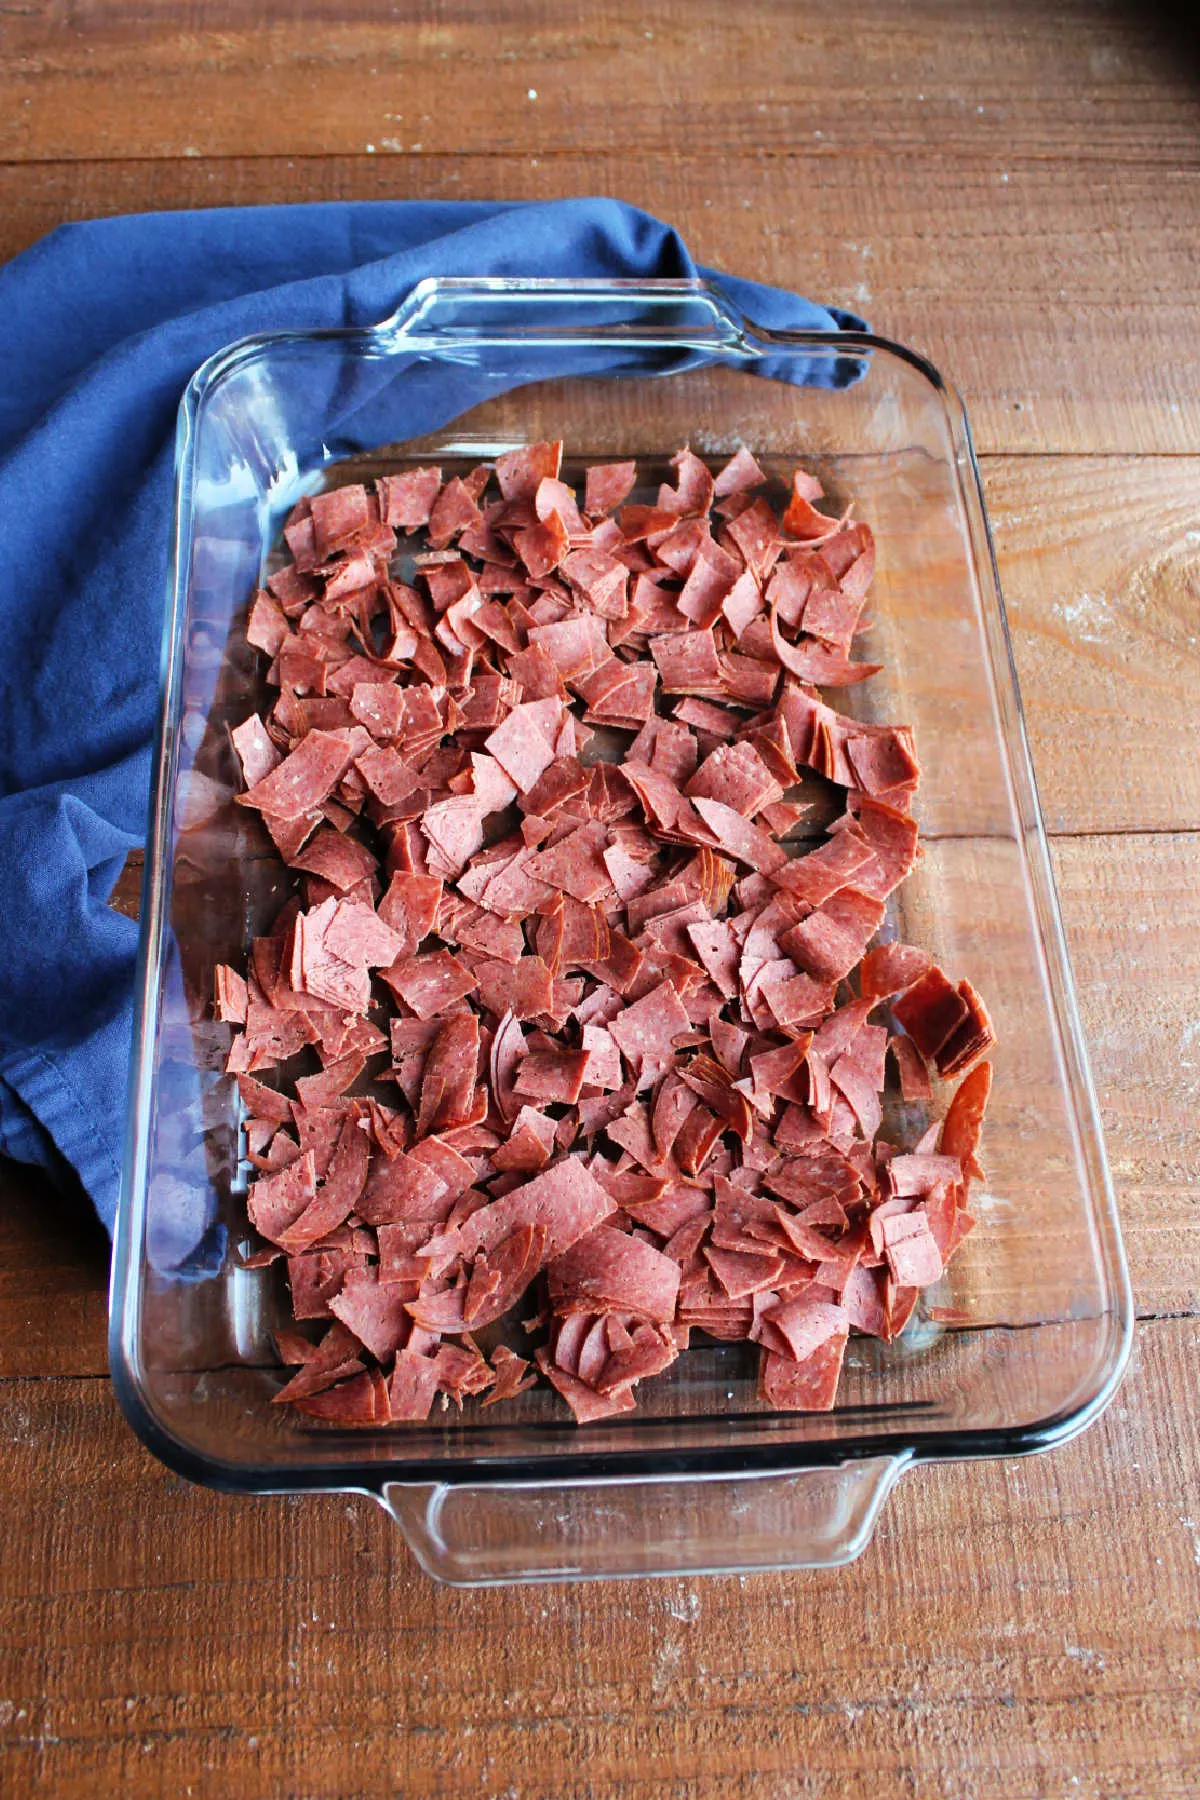 Chopped dried beef in the bottom of a glass 9x13-inch pan.